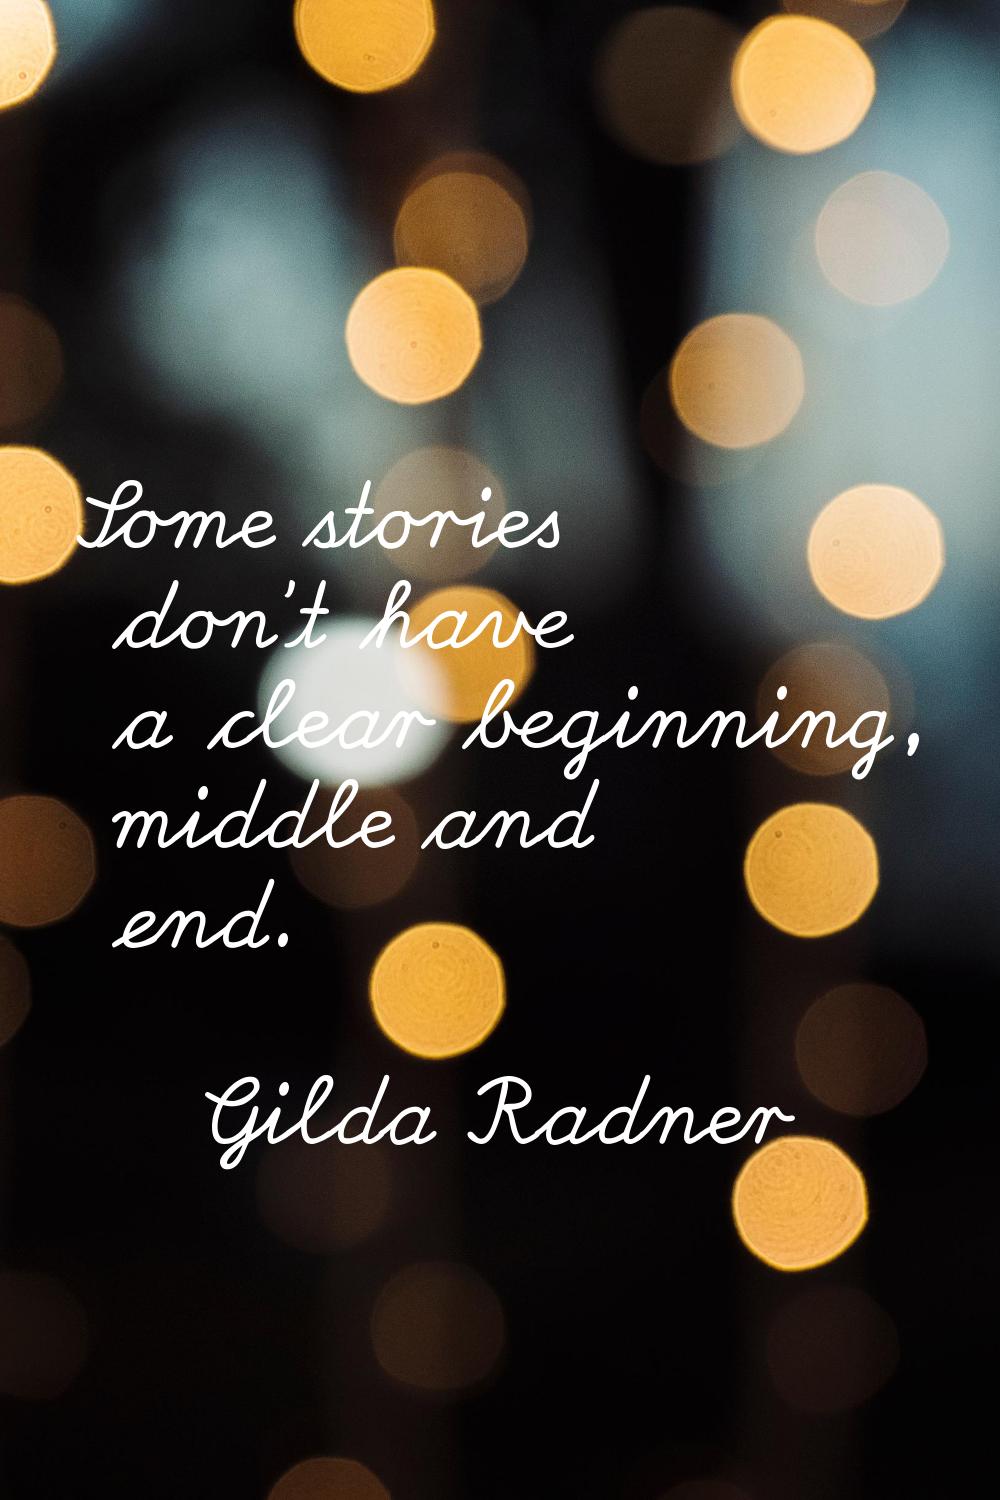 Some stories don't have a clear beginning, middle and end.